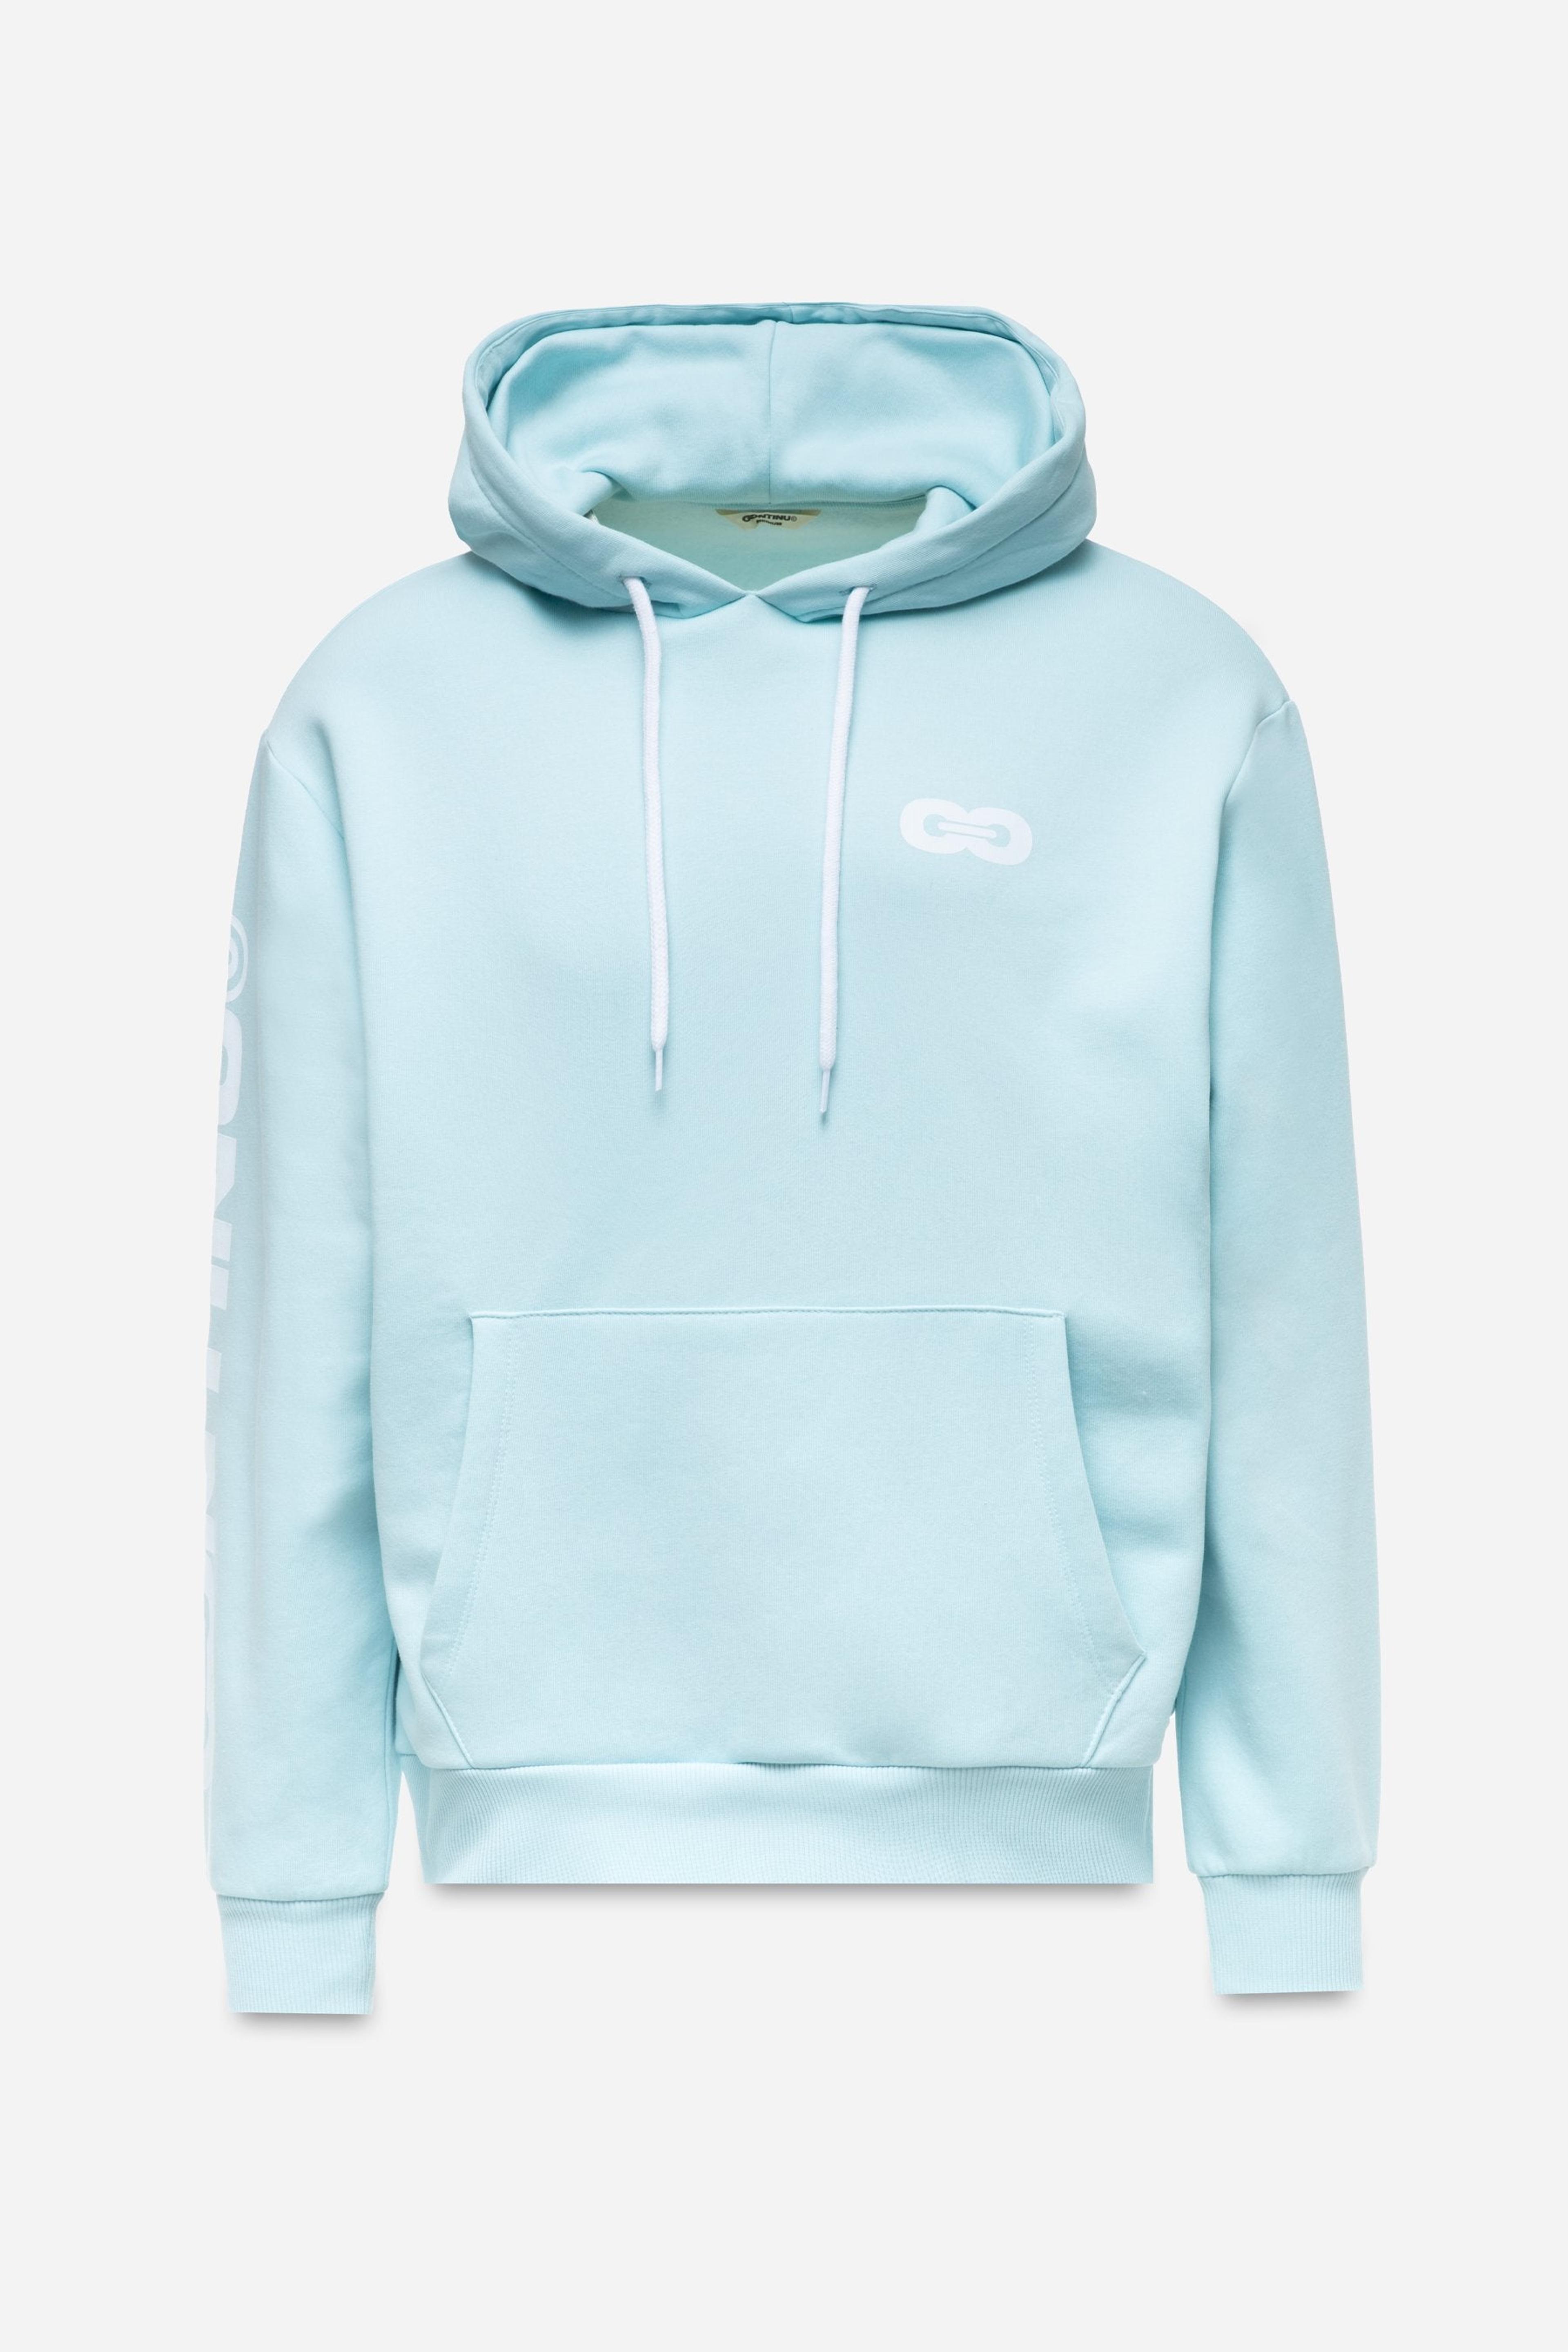 Alternate View 6 of CONTINU8 PALE BLUE OVERSIZED HOODIE